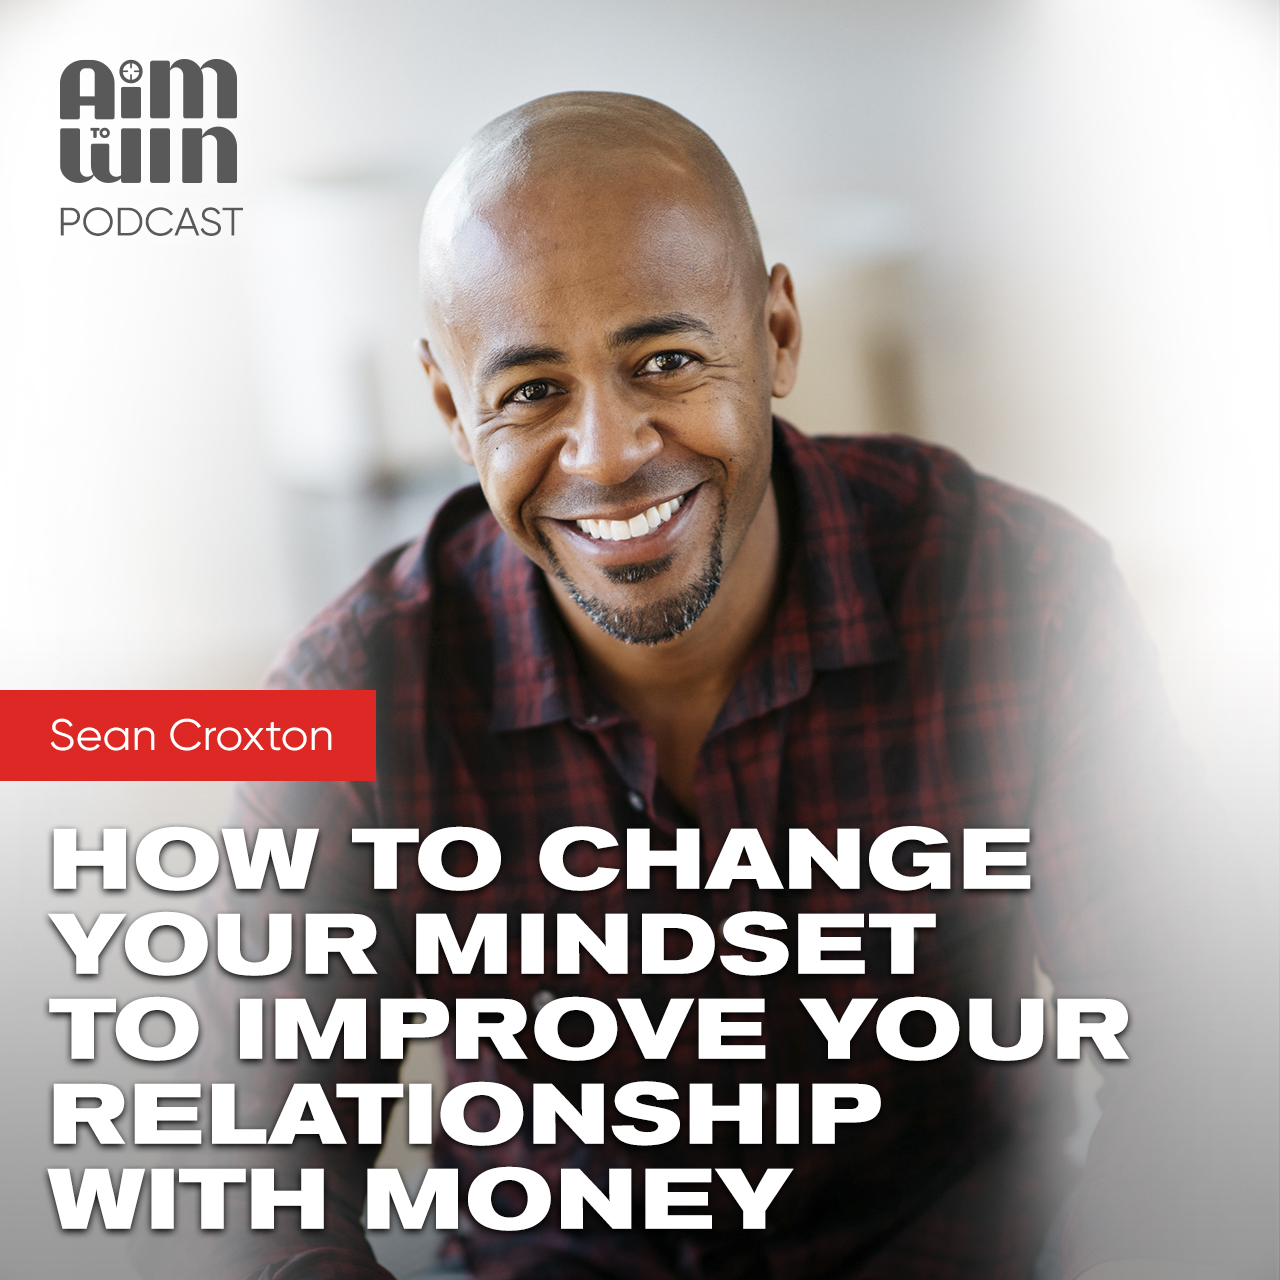 How to Change your Mindset to Improve your Relationship with Money with Sean Croxton